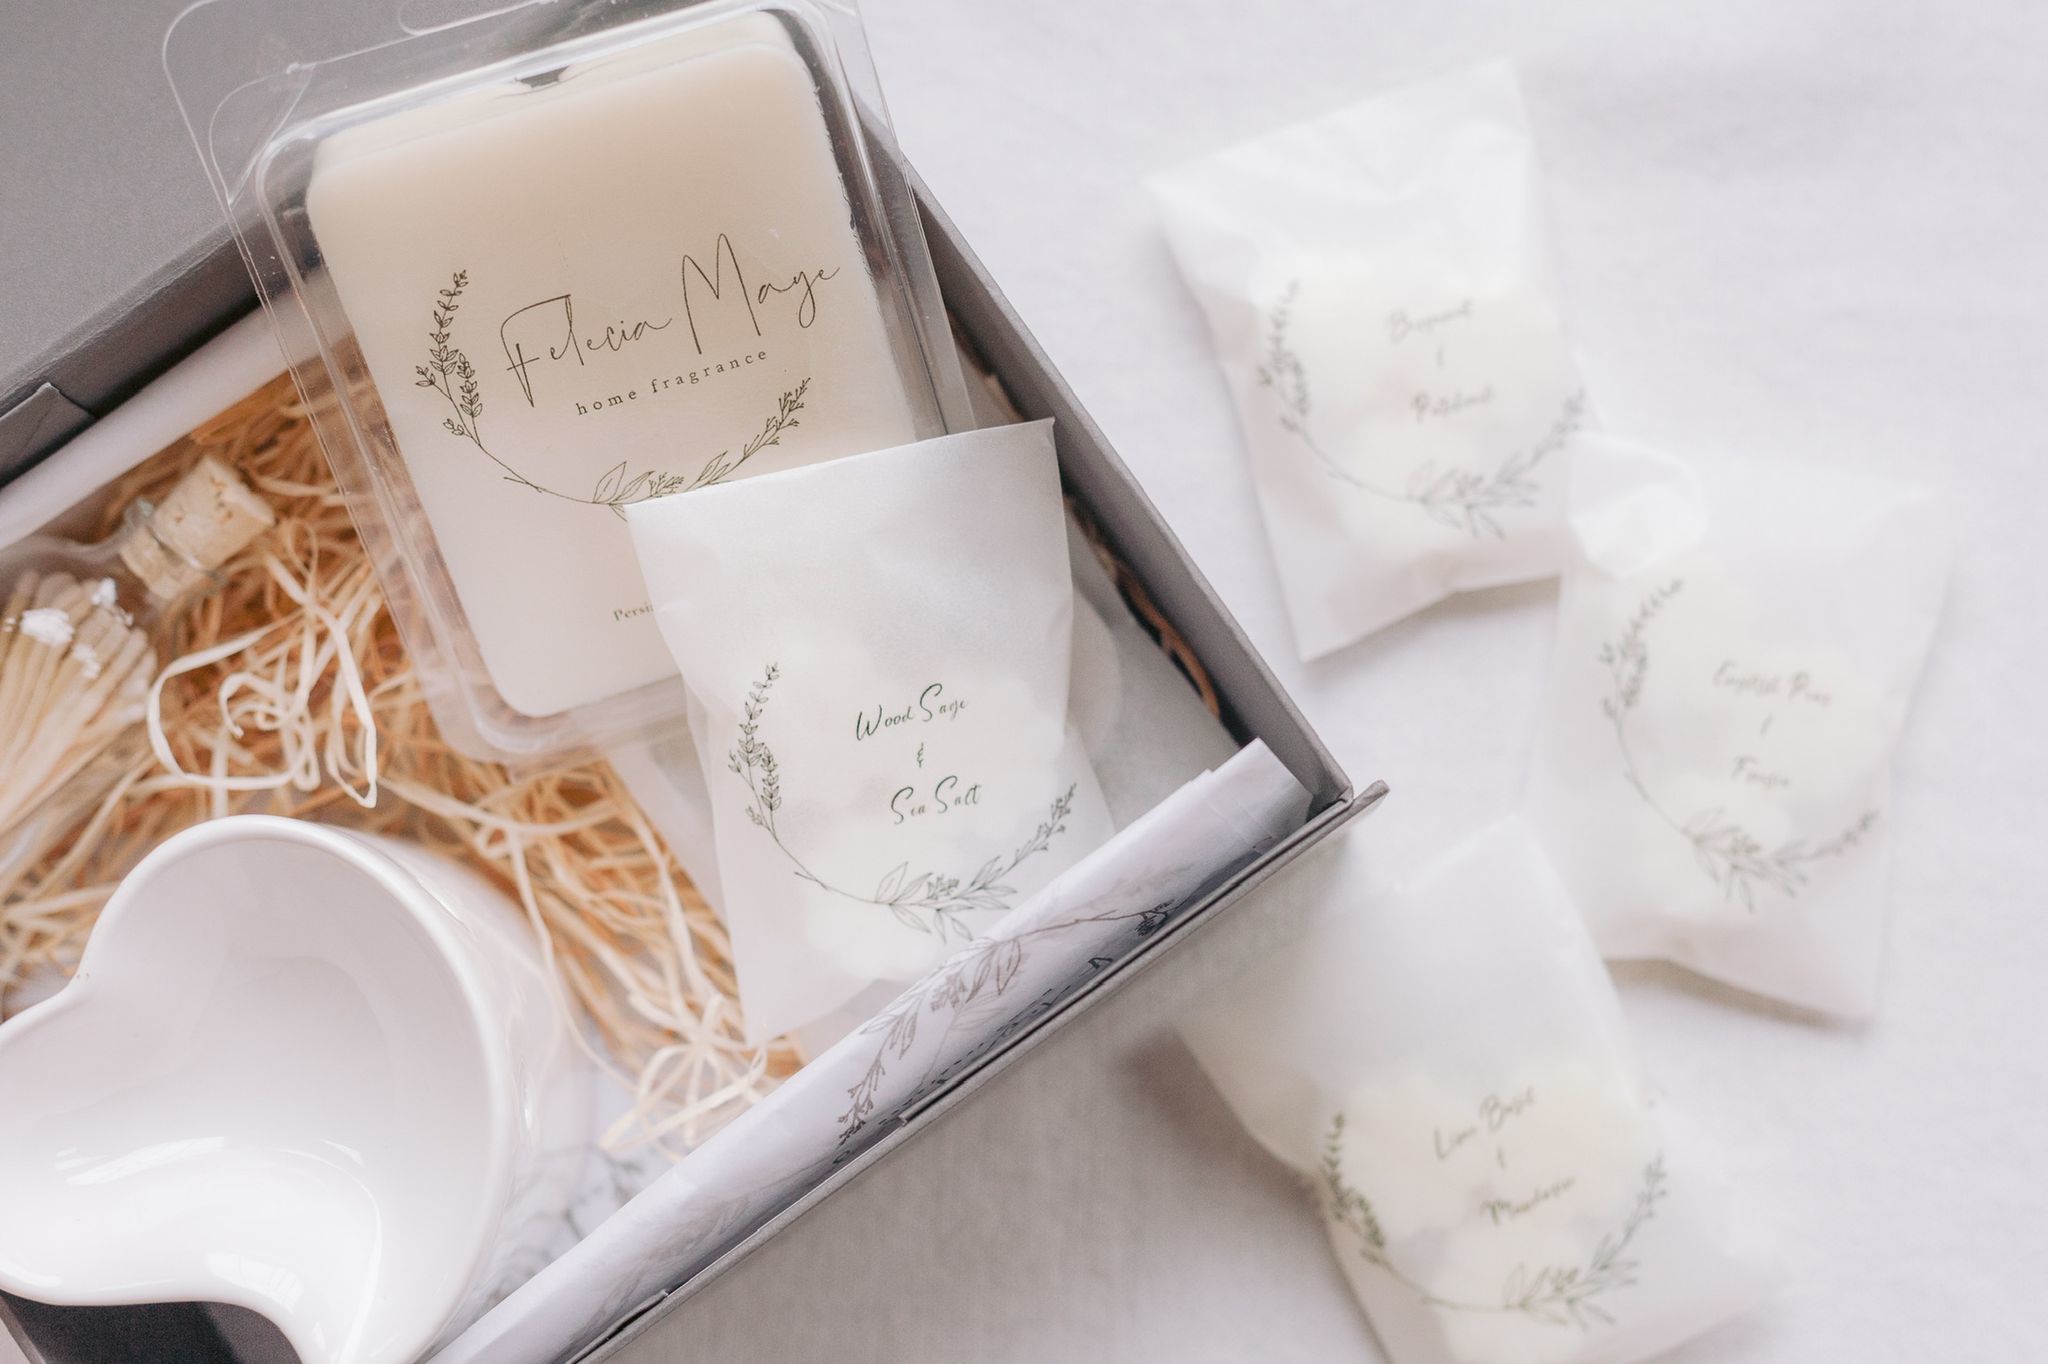 Gifting and candles by Felecia Maye Home Fragrance.